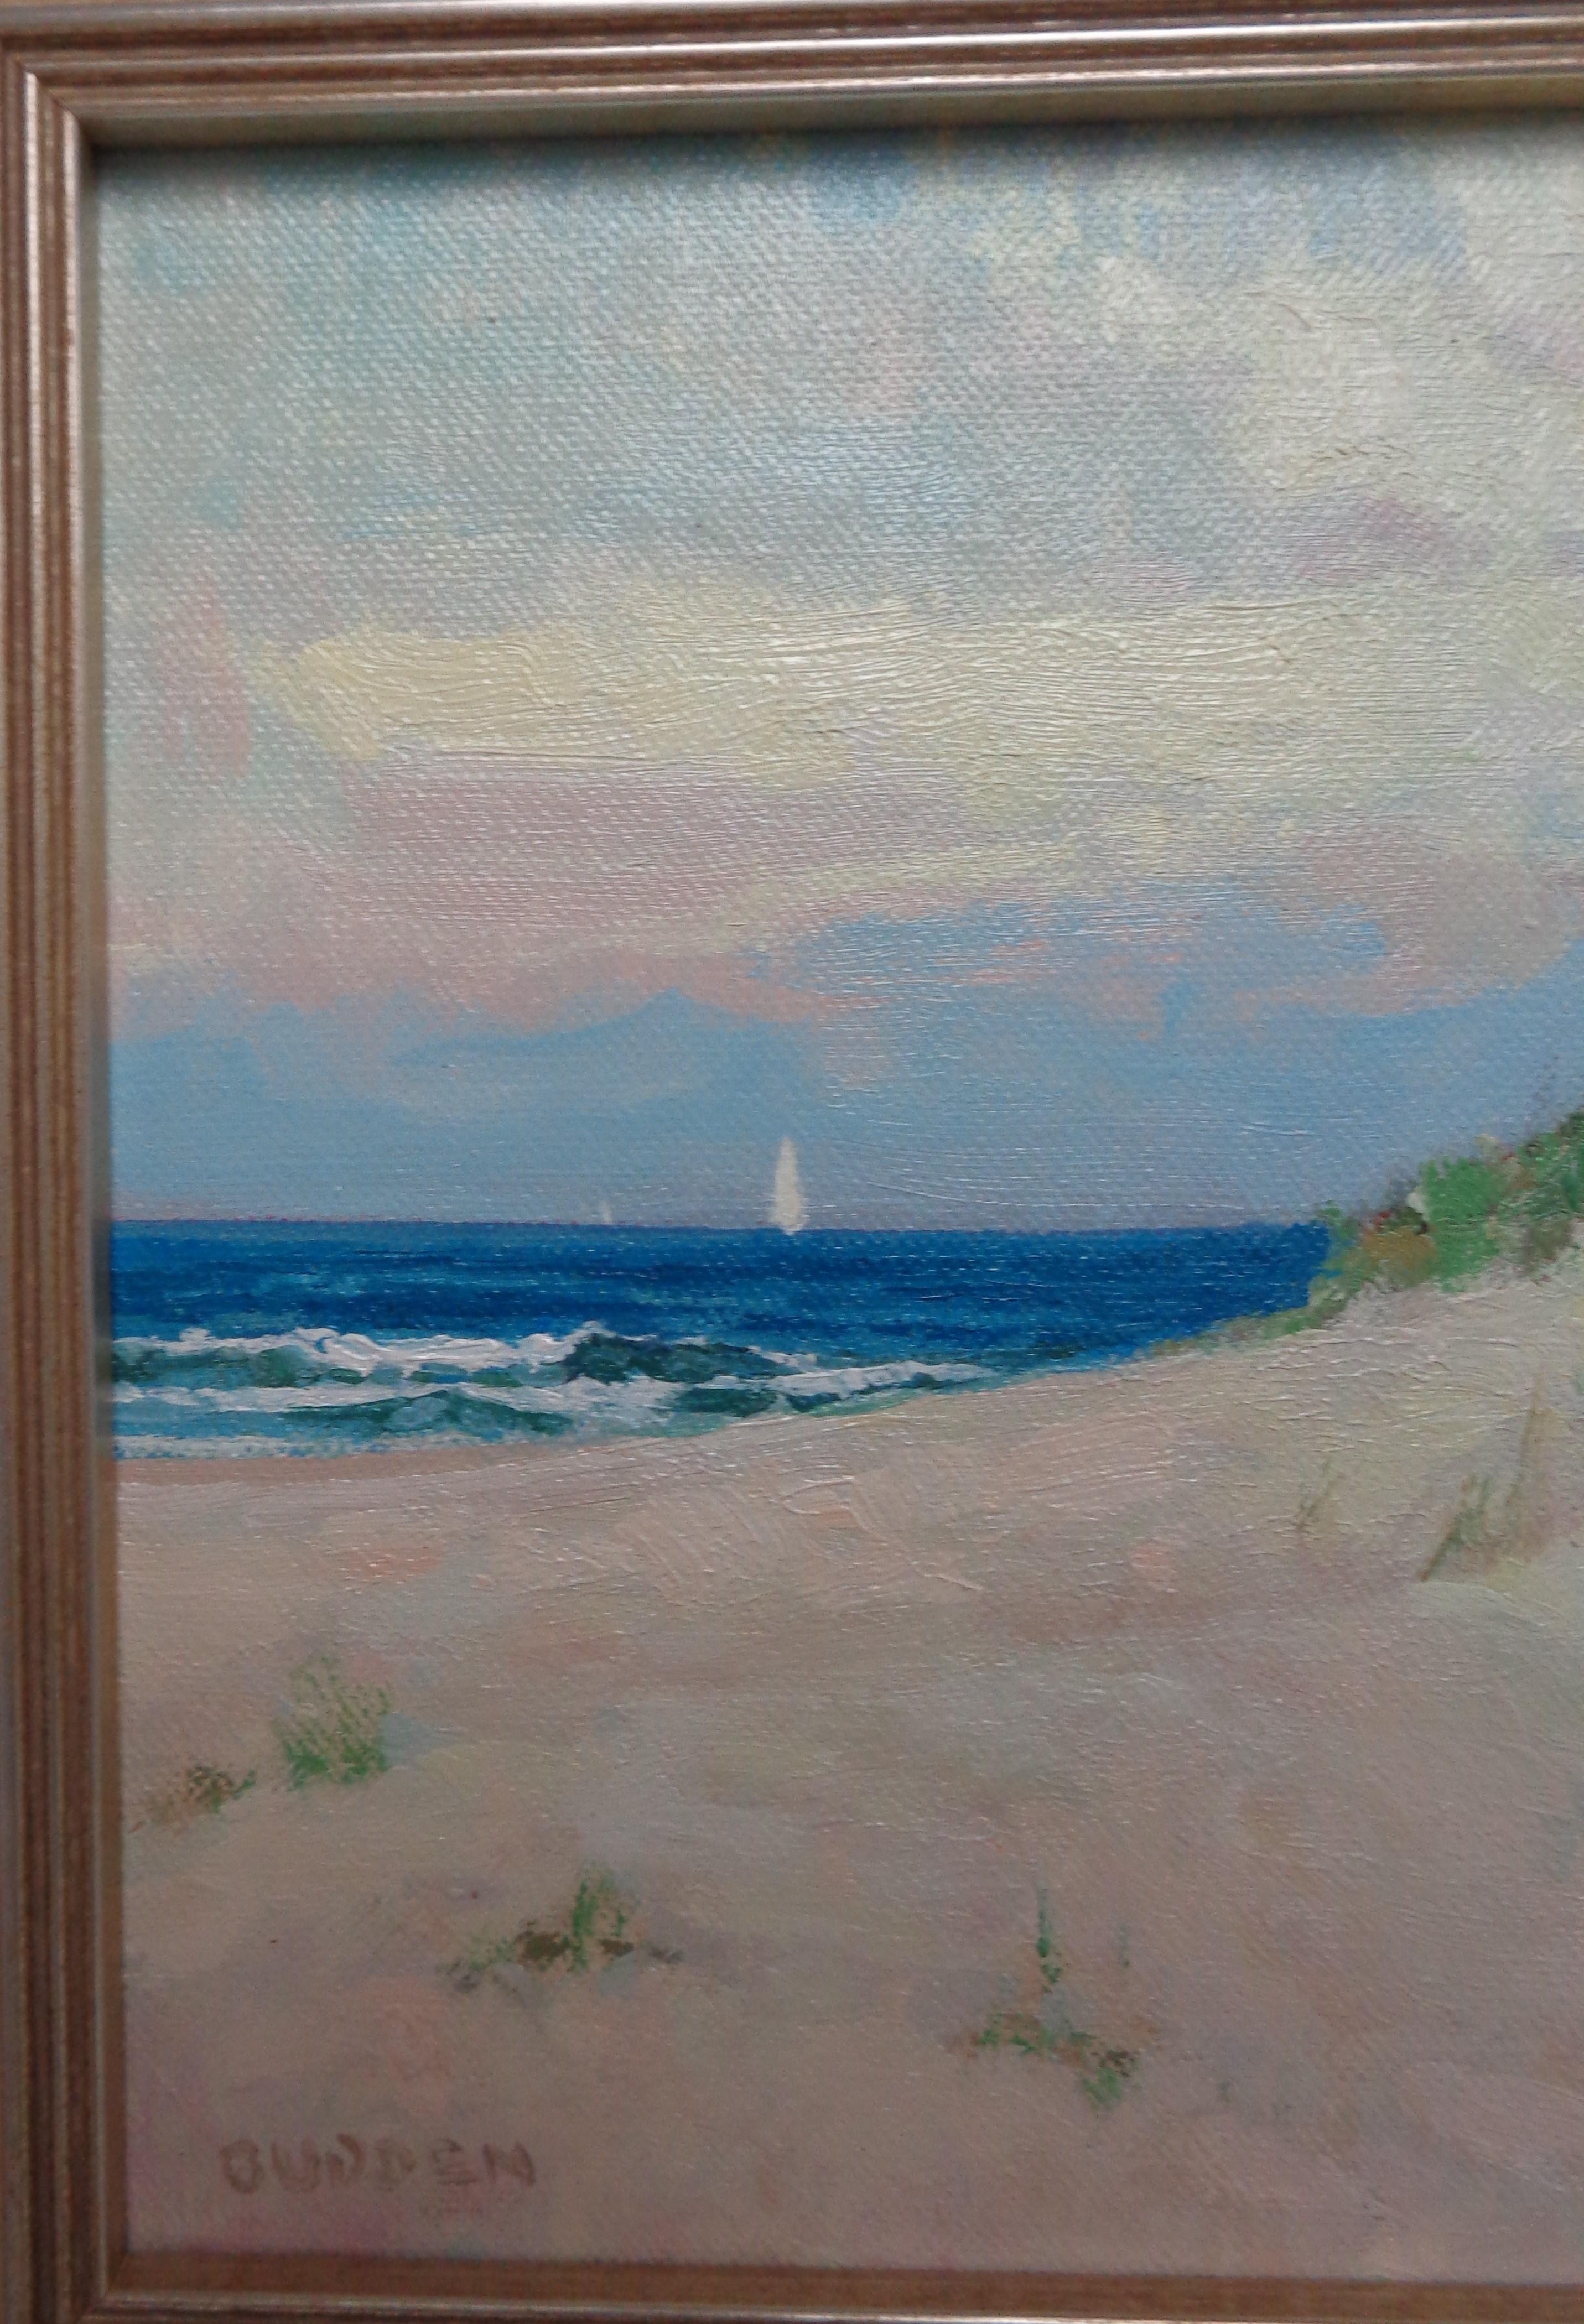 Beach & Ocean Impressionistic Seascape Oil Painting Dunes by Michael Budden For Sale 2